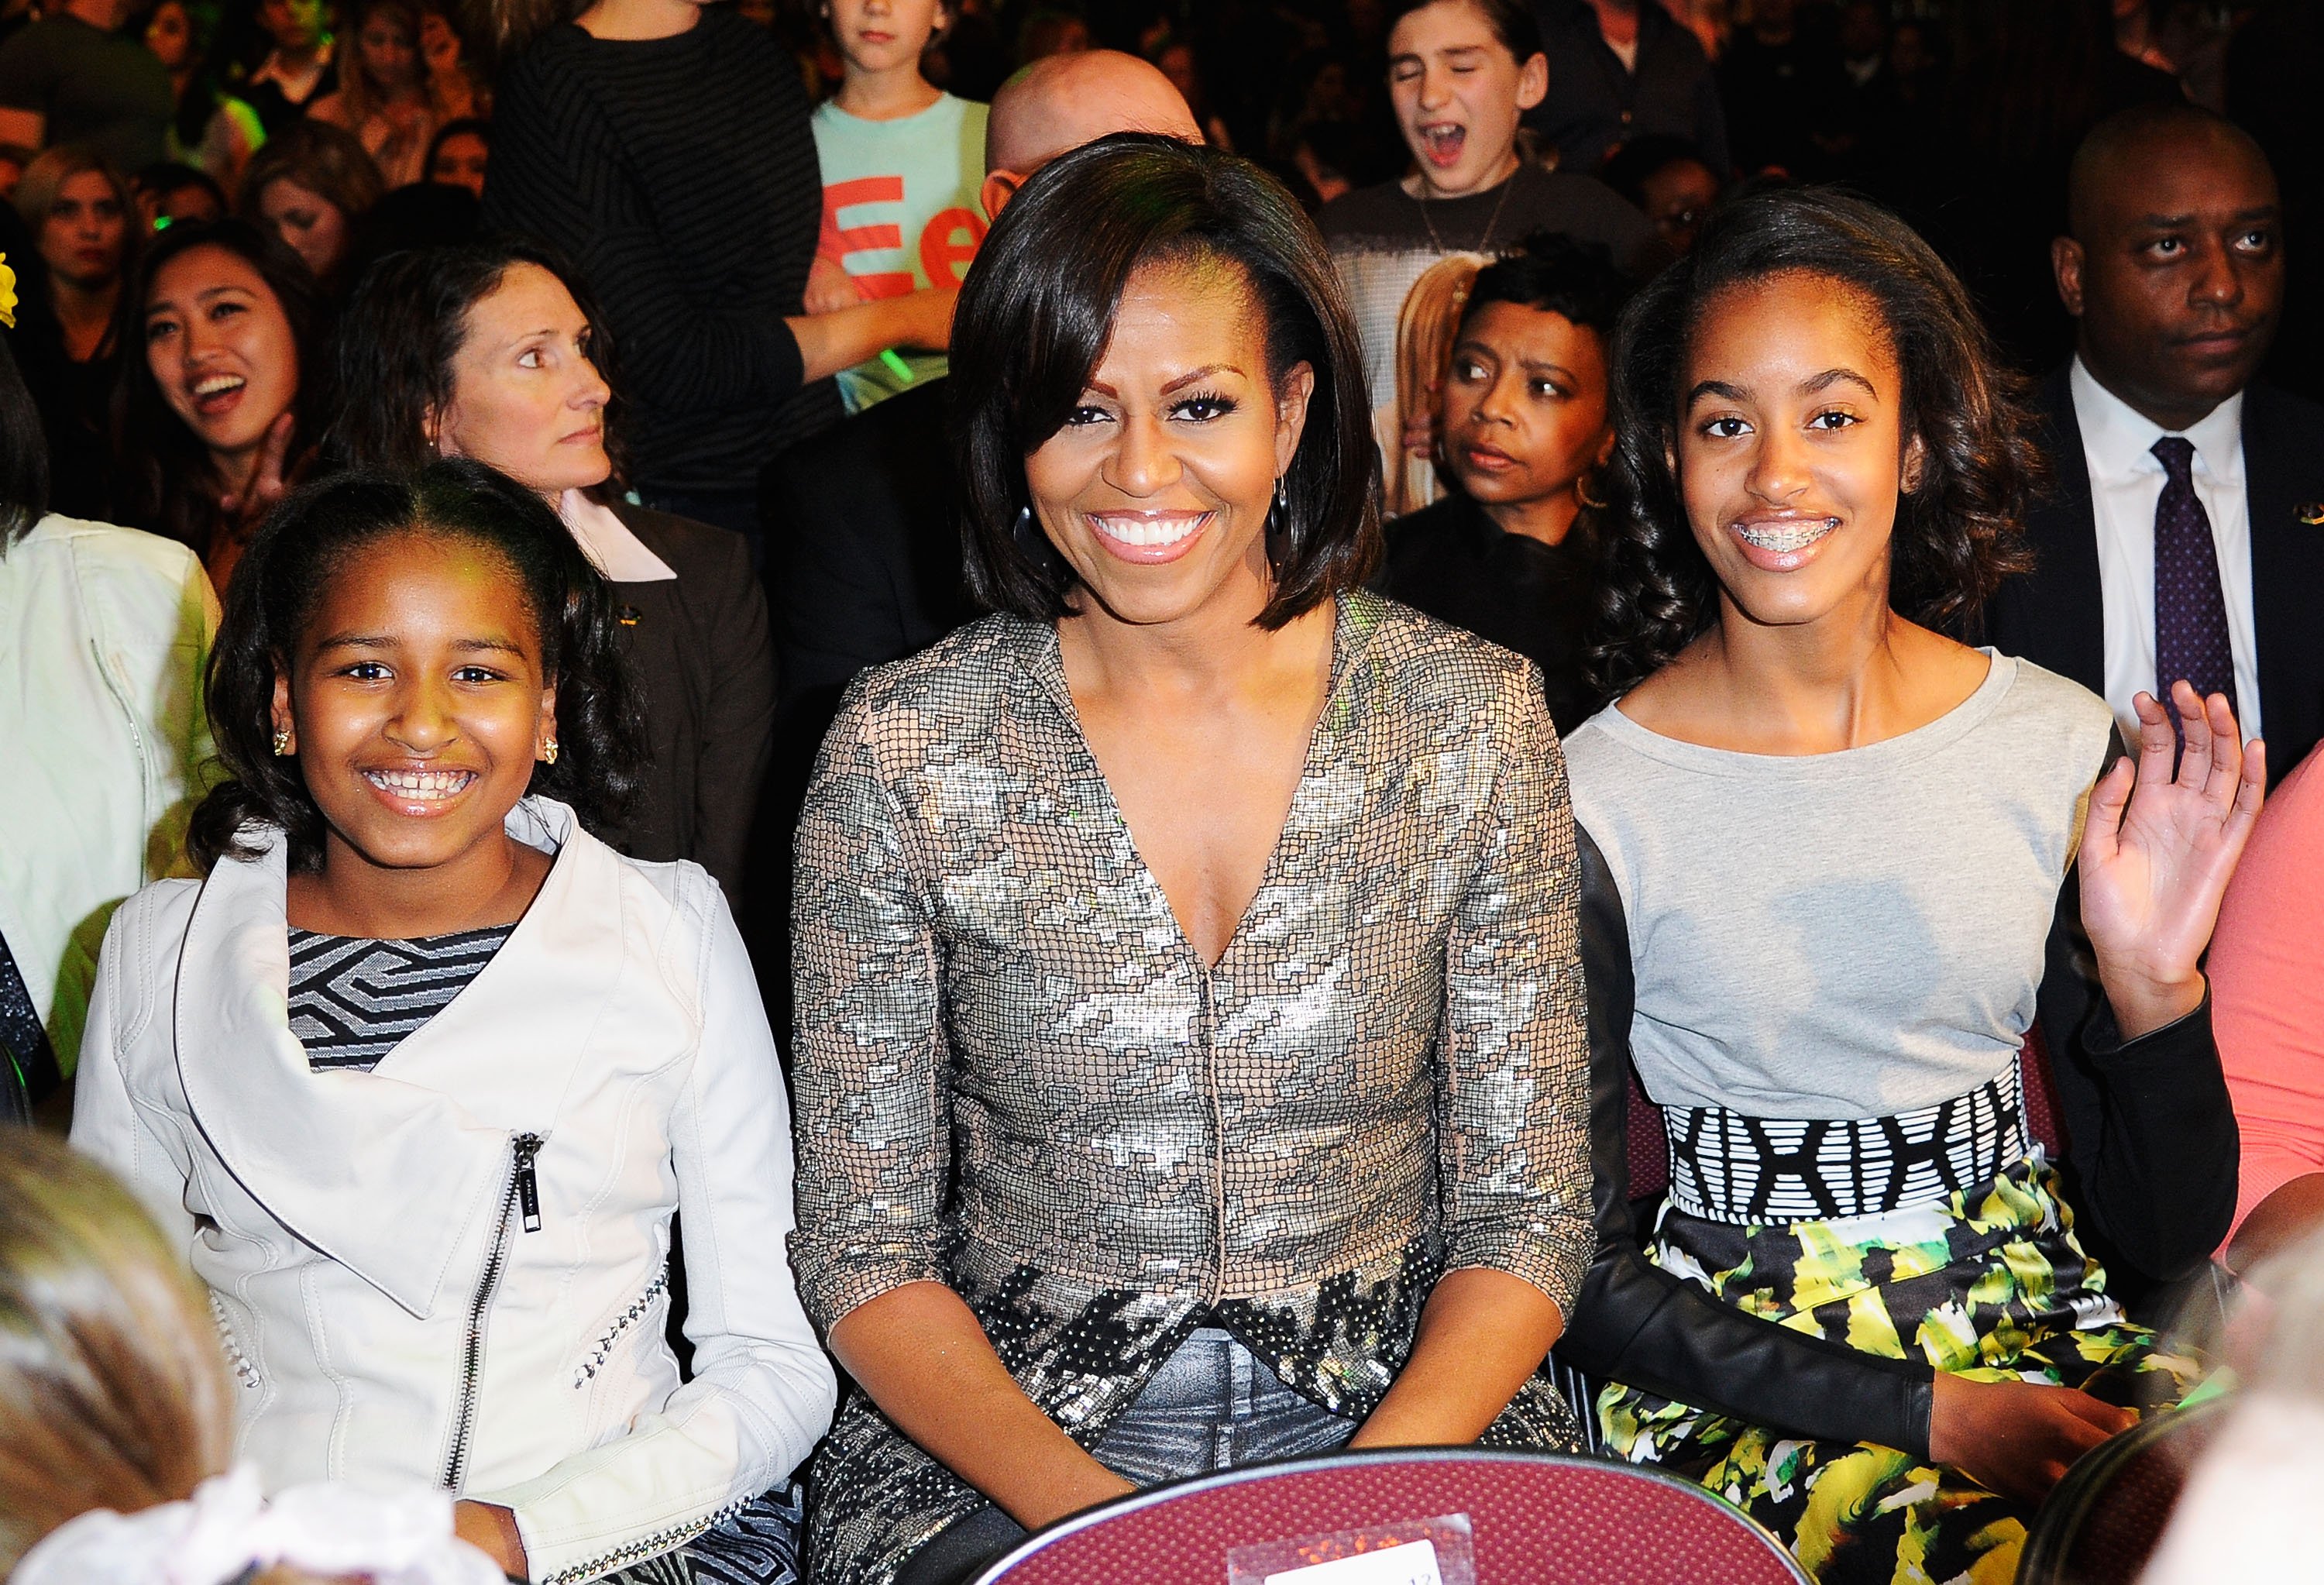 Michelle, Sasha, and Malia Obama on March 31, 2012 in Los Angeles, California | Photo: Getty Images